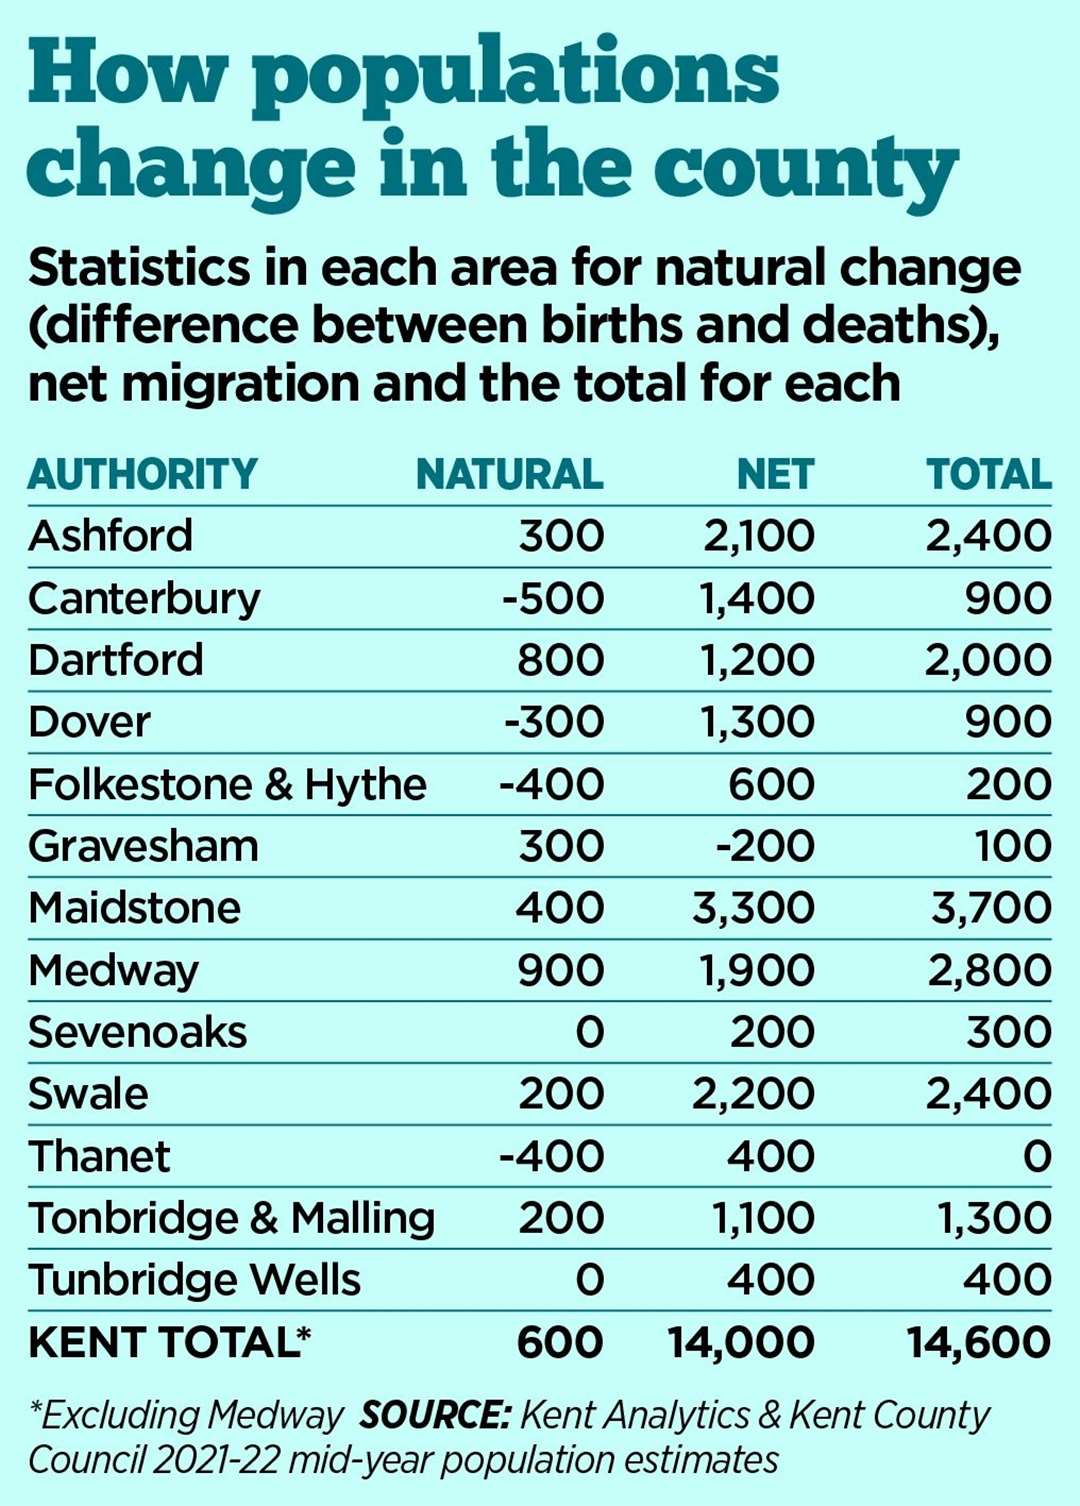 How the population is altered due to natural change and migration